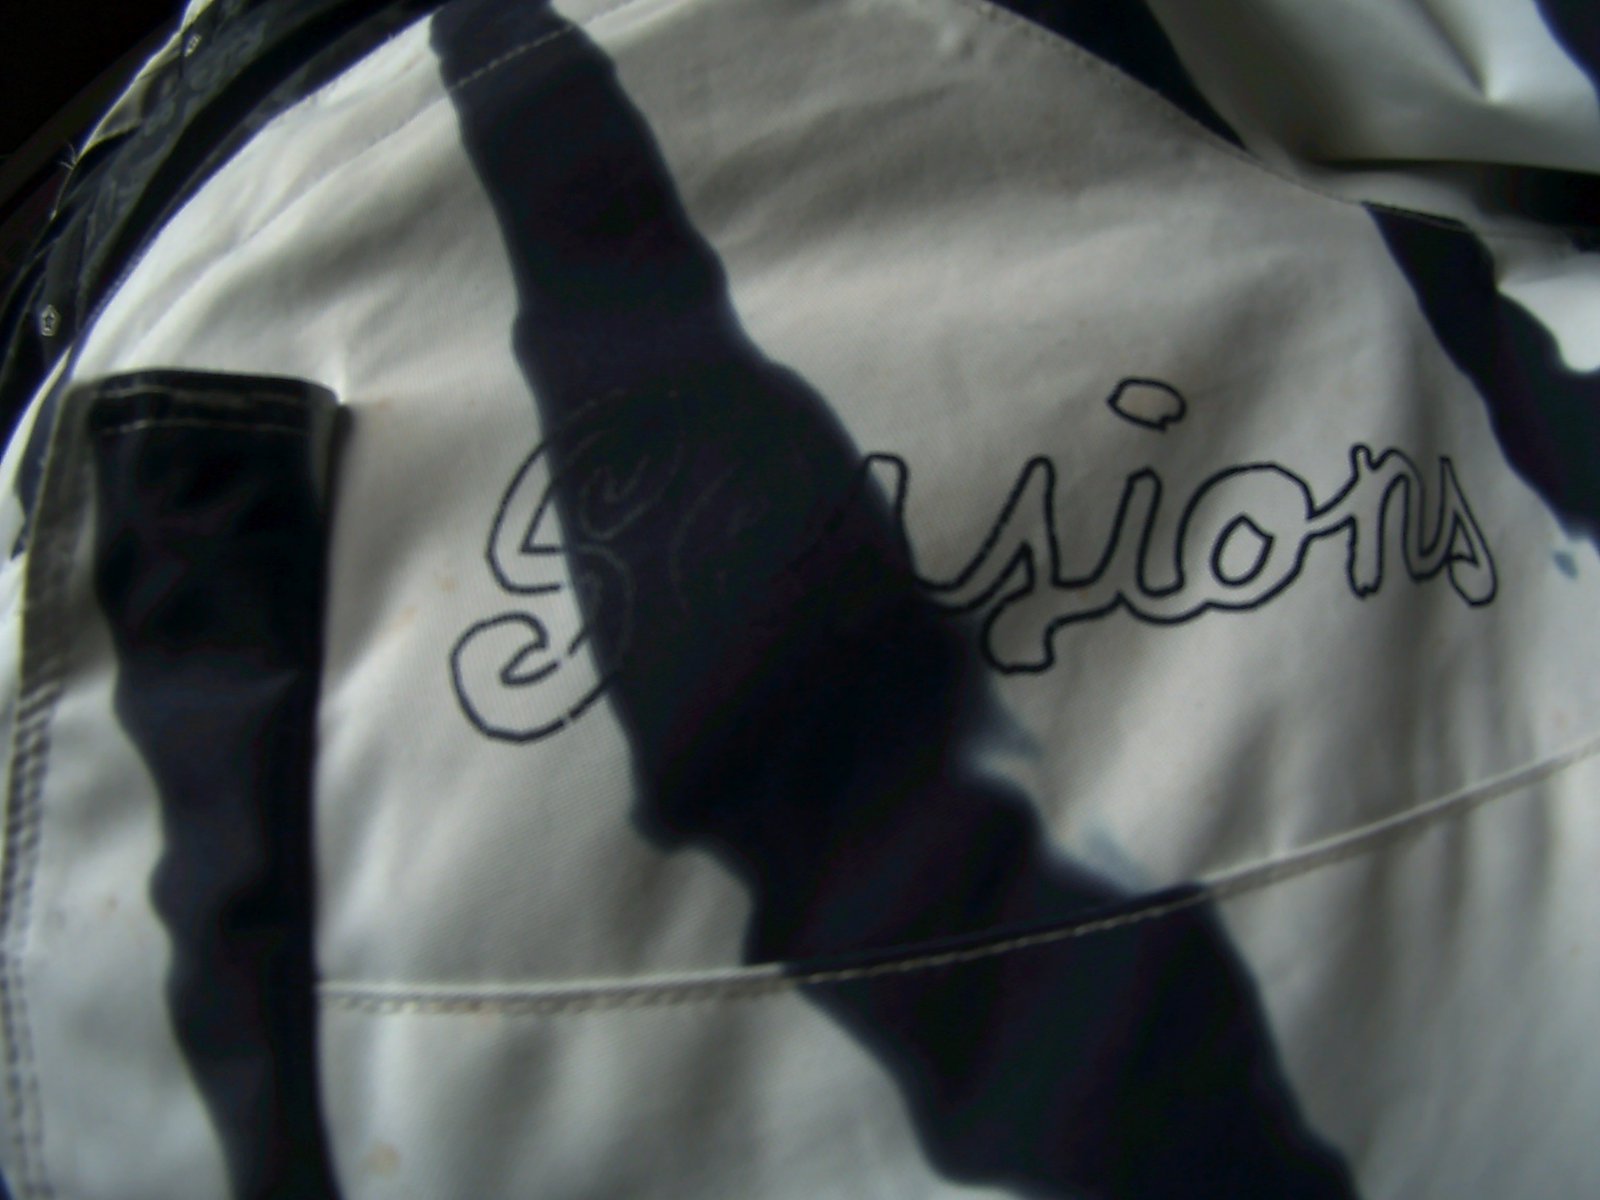 Sessions jacket